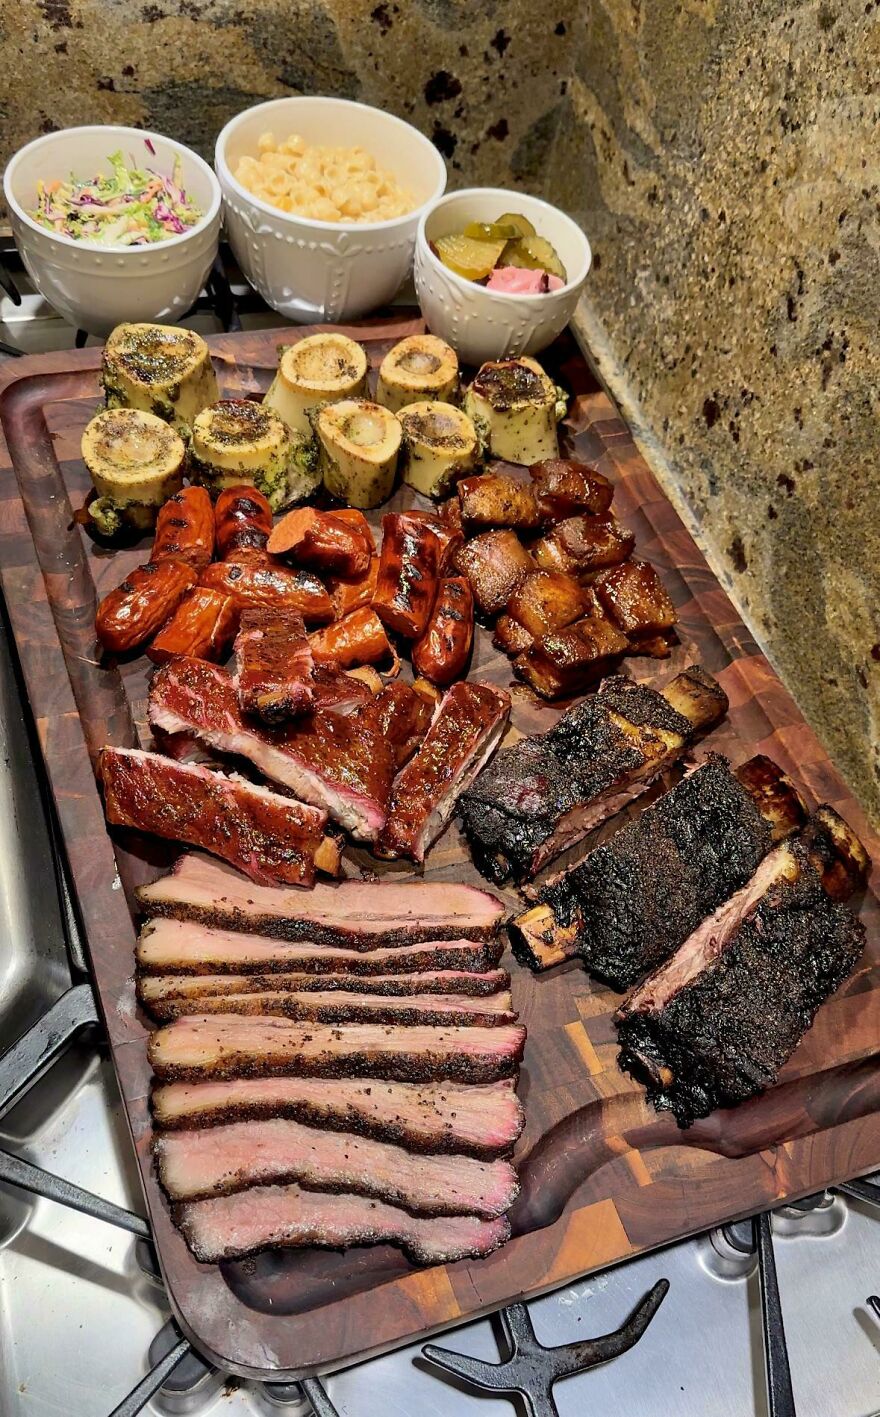 BBQ Platter That I Made For Some Old Good Friends